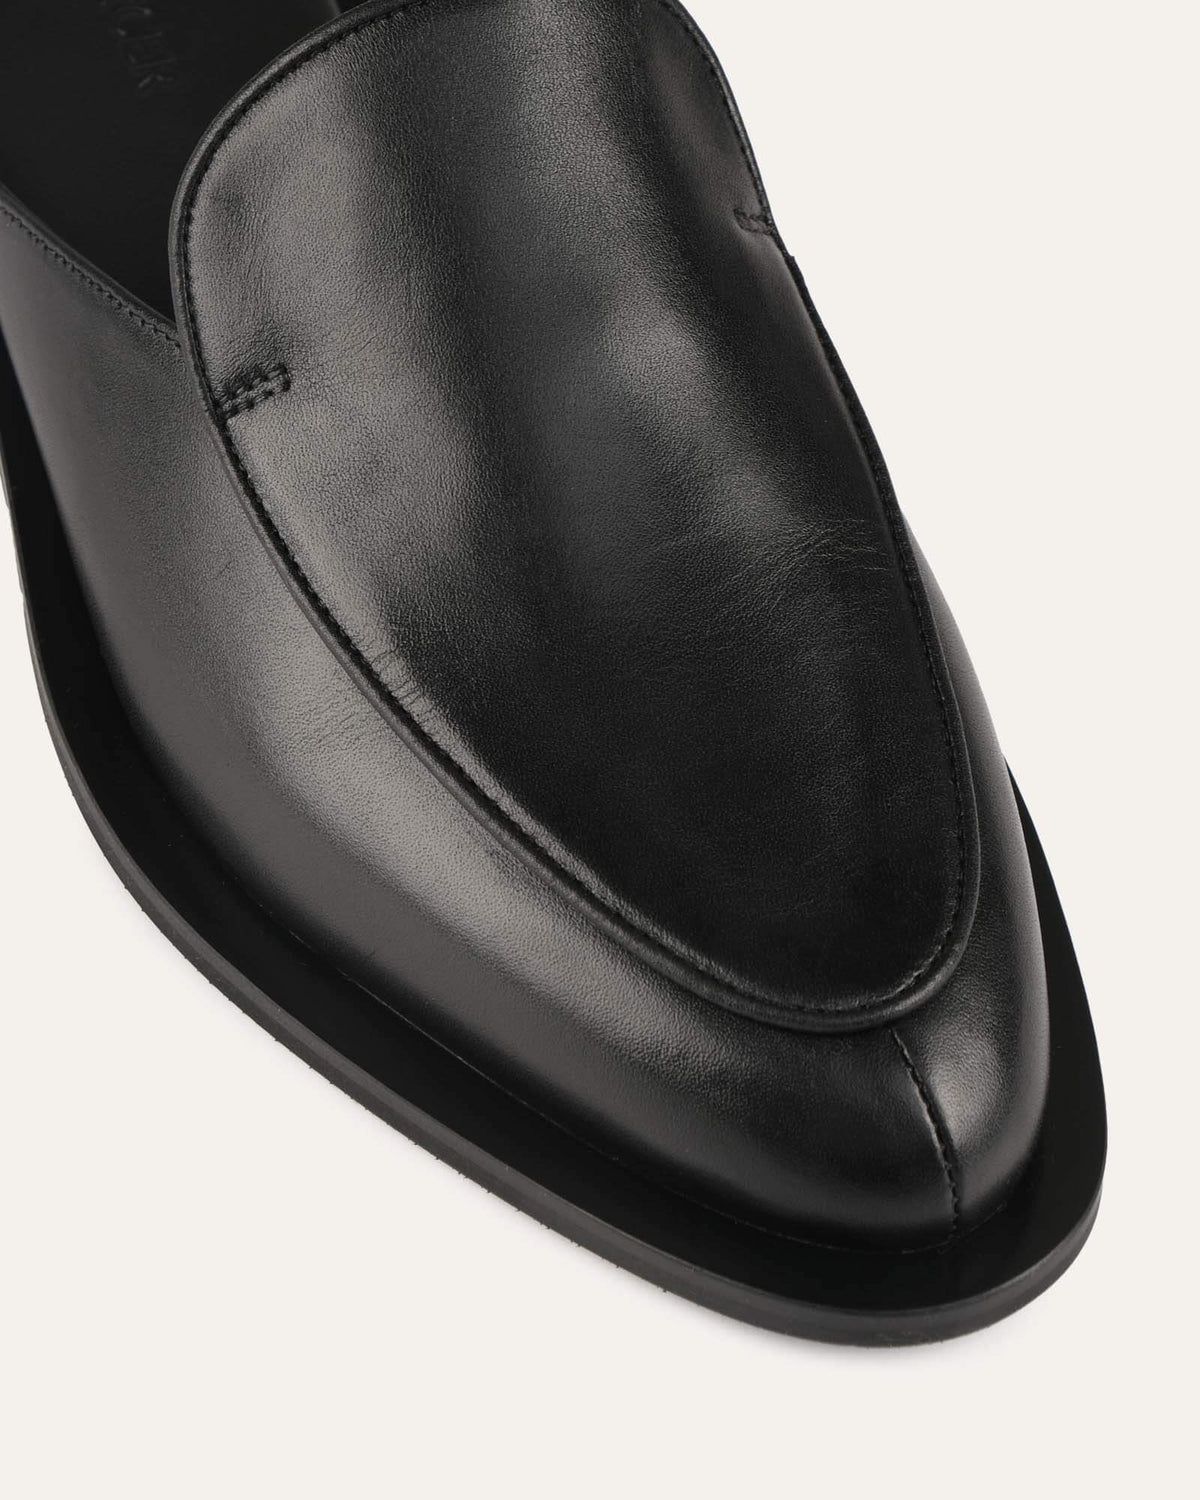 STELLA LOAFERS BLACK LEATHER